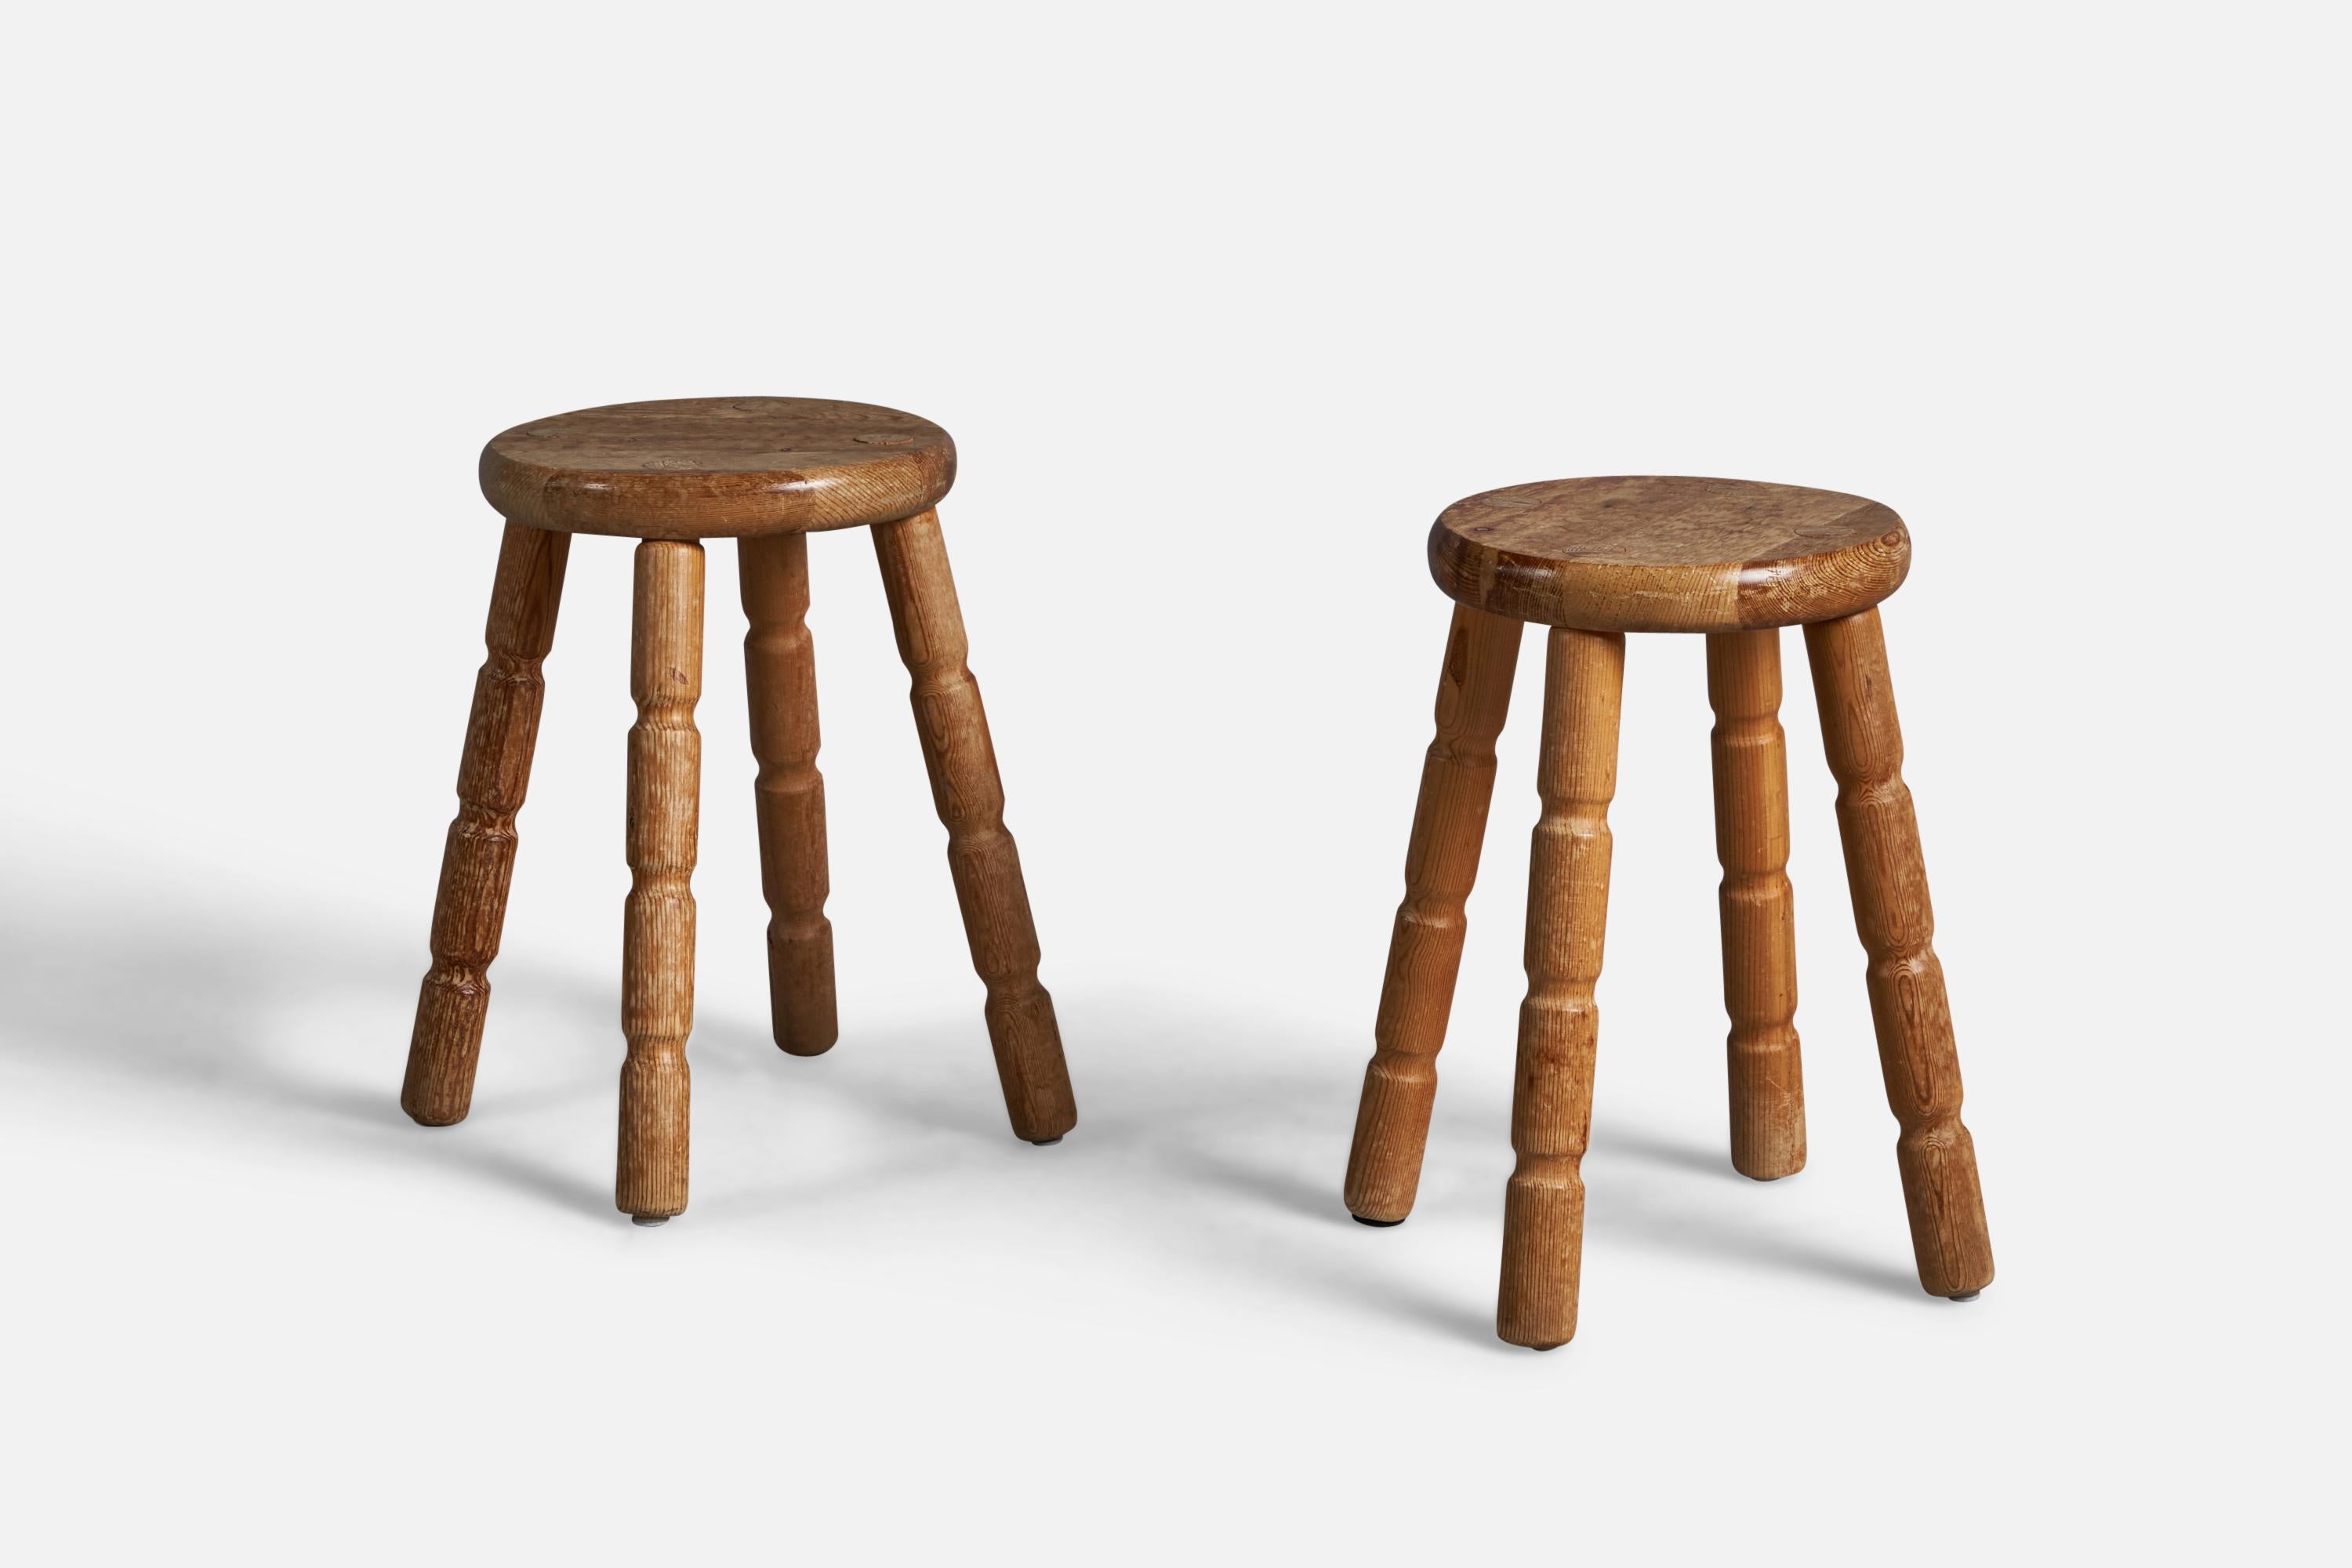 A pair of solid pine stools, designed and produced in Sweden, 1960s.